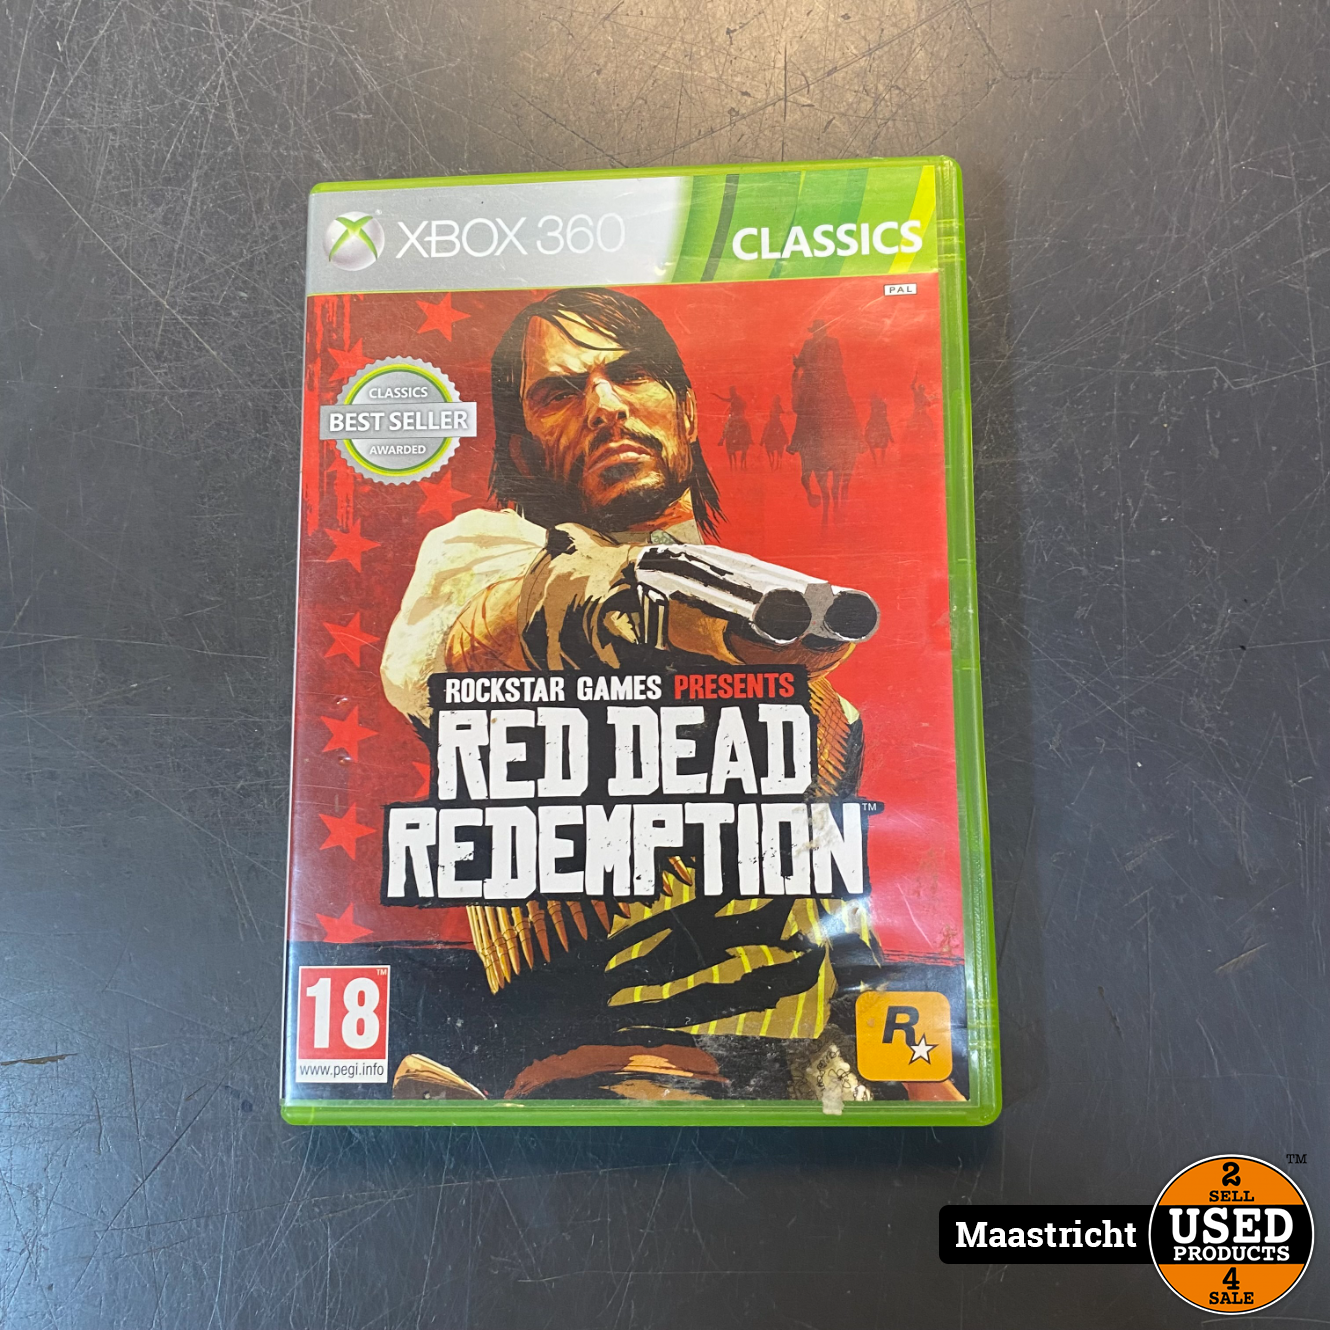 Barry Paard jas Xbox 360 Game - Red dead Redemption - Used Products Maastricht